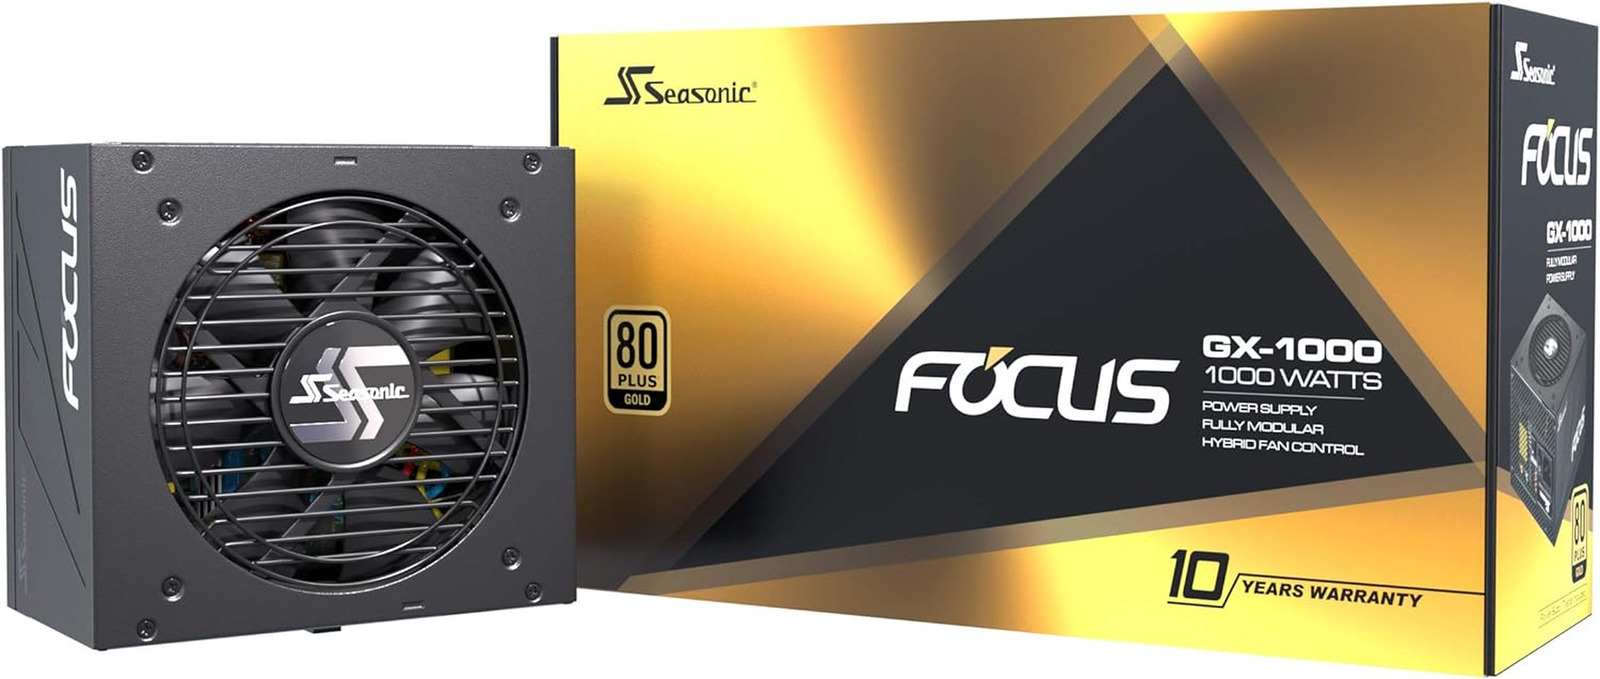 Focus GX-1000, 1000W 80+ Gold, Full-Modular, Fan Control in Fanless, Silent, and